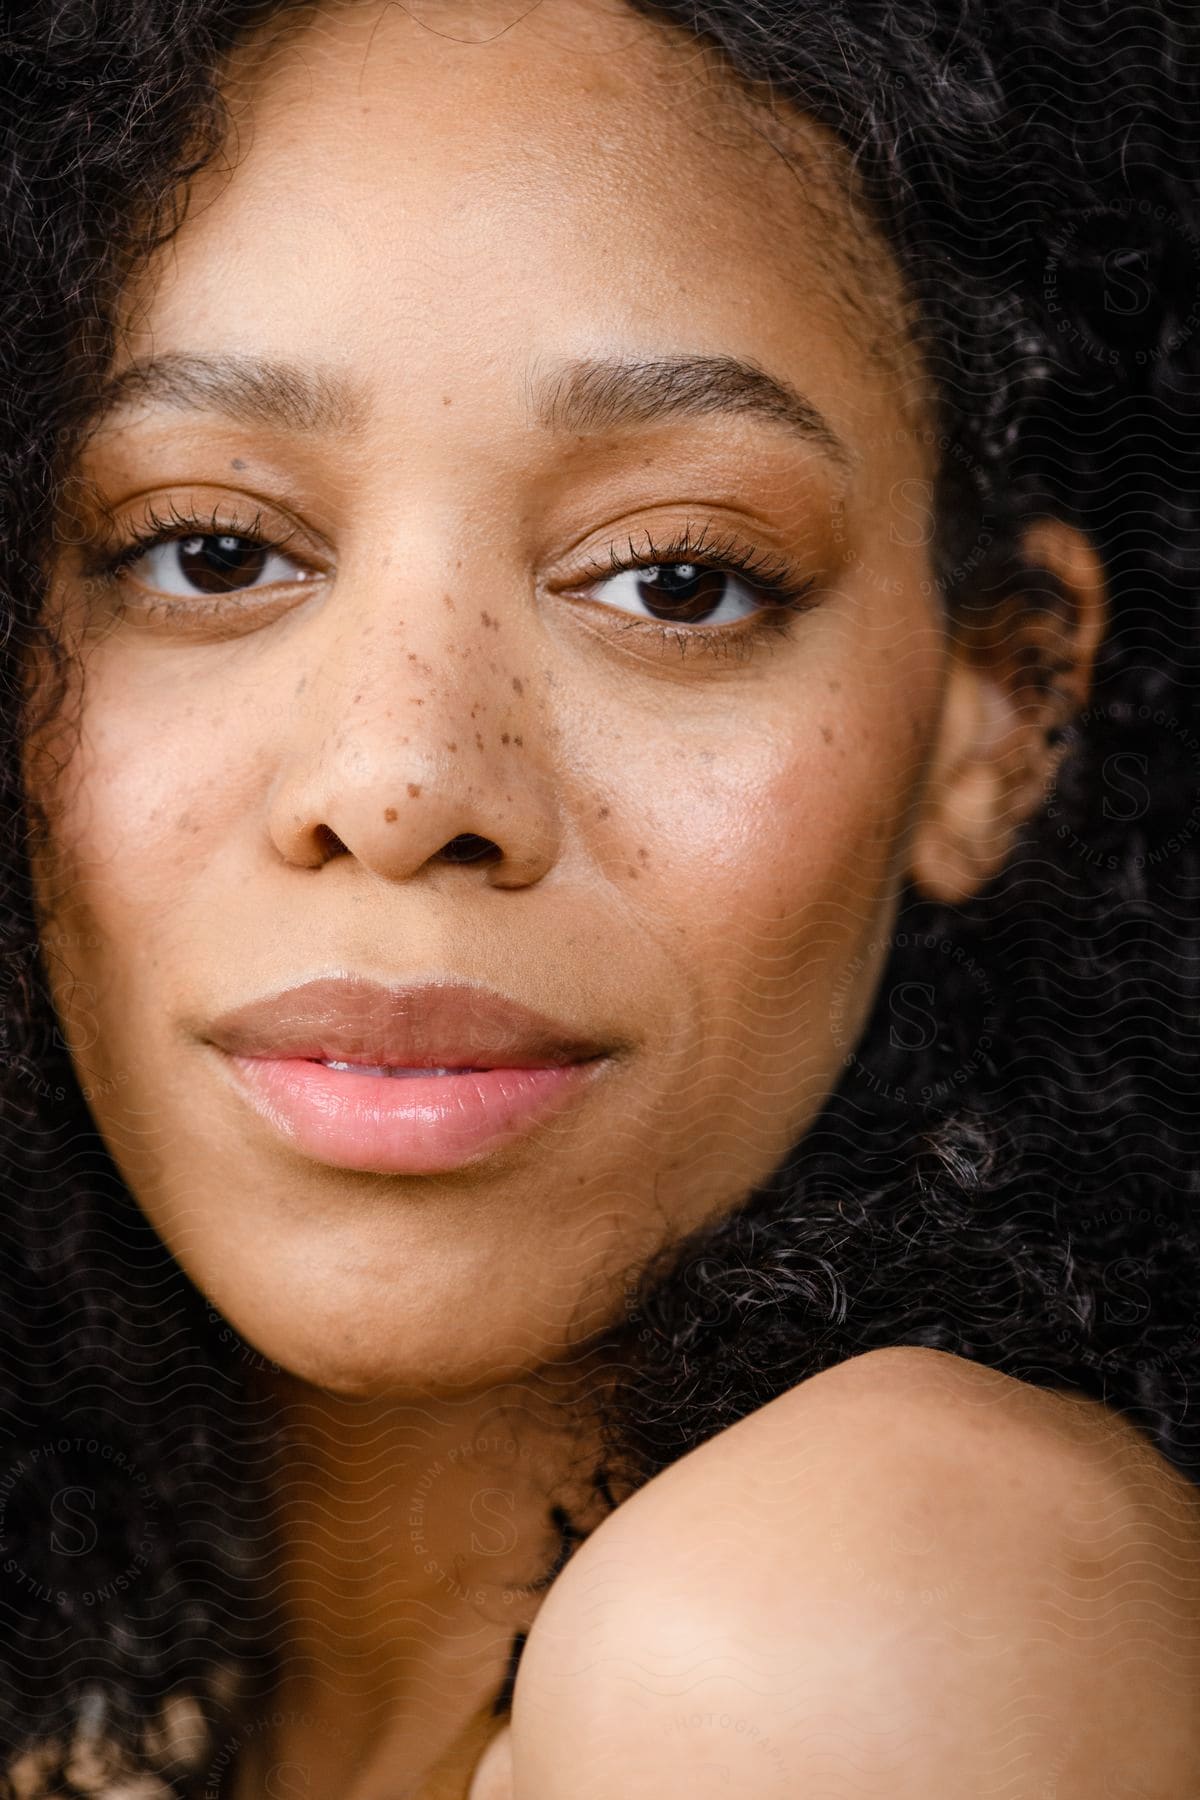 A black woman with freckles, frizzy curly hair gazes neutrally at the camera.